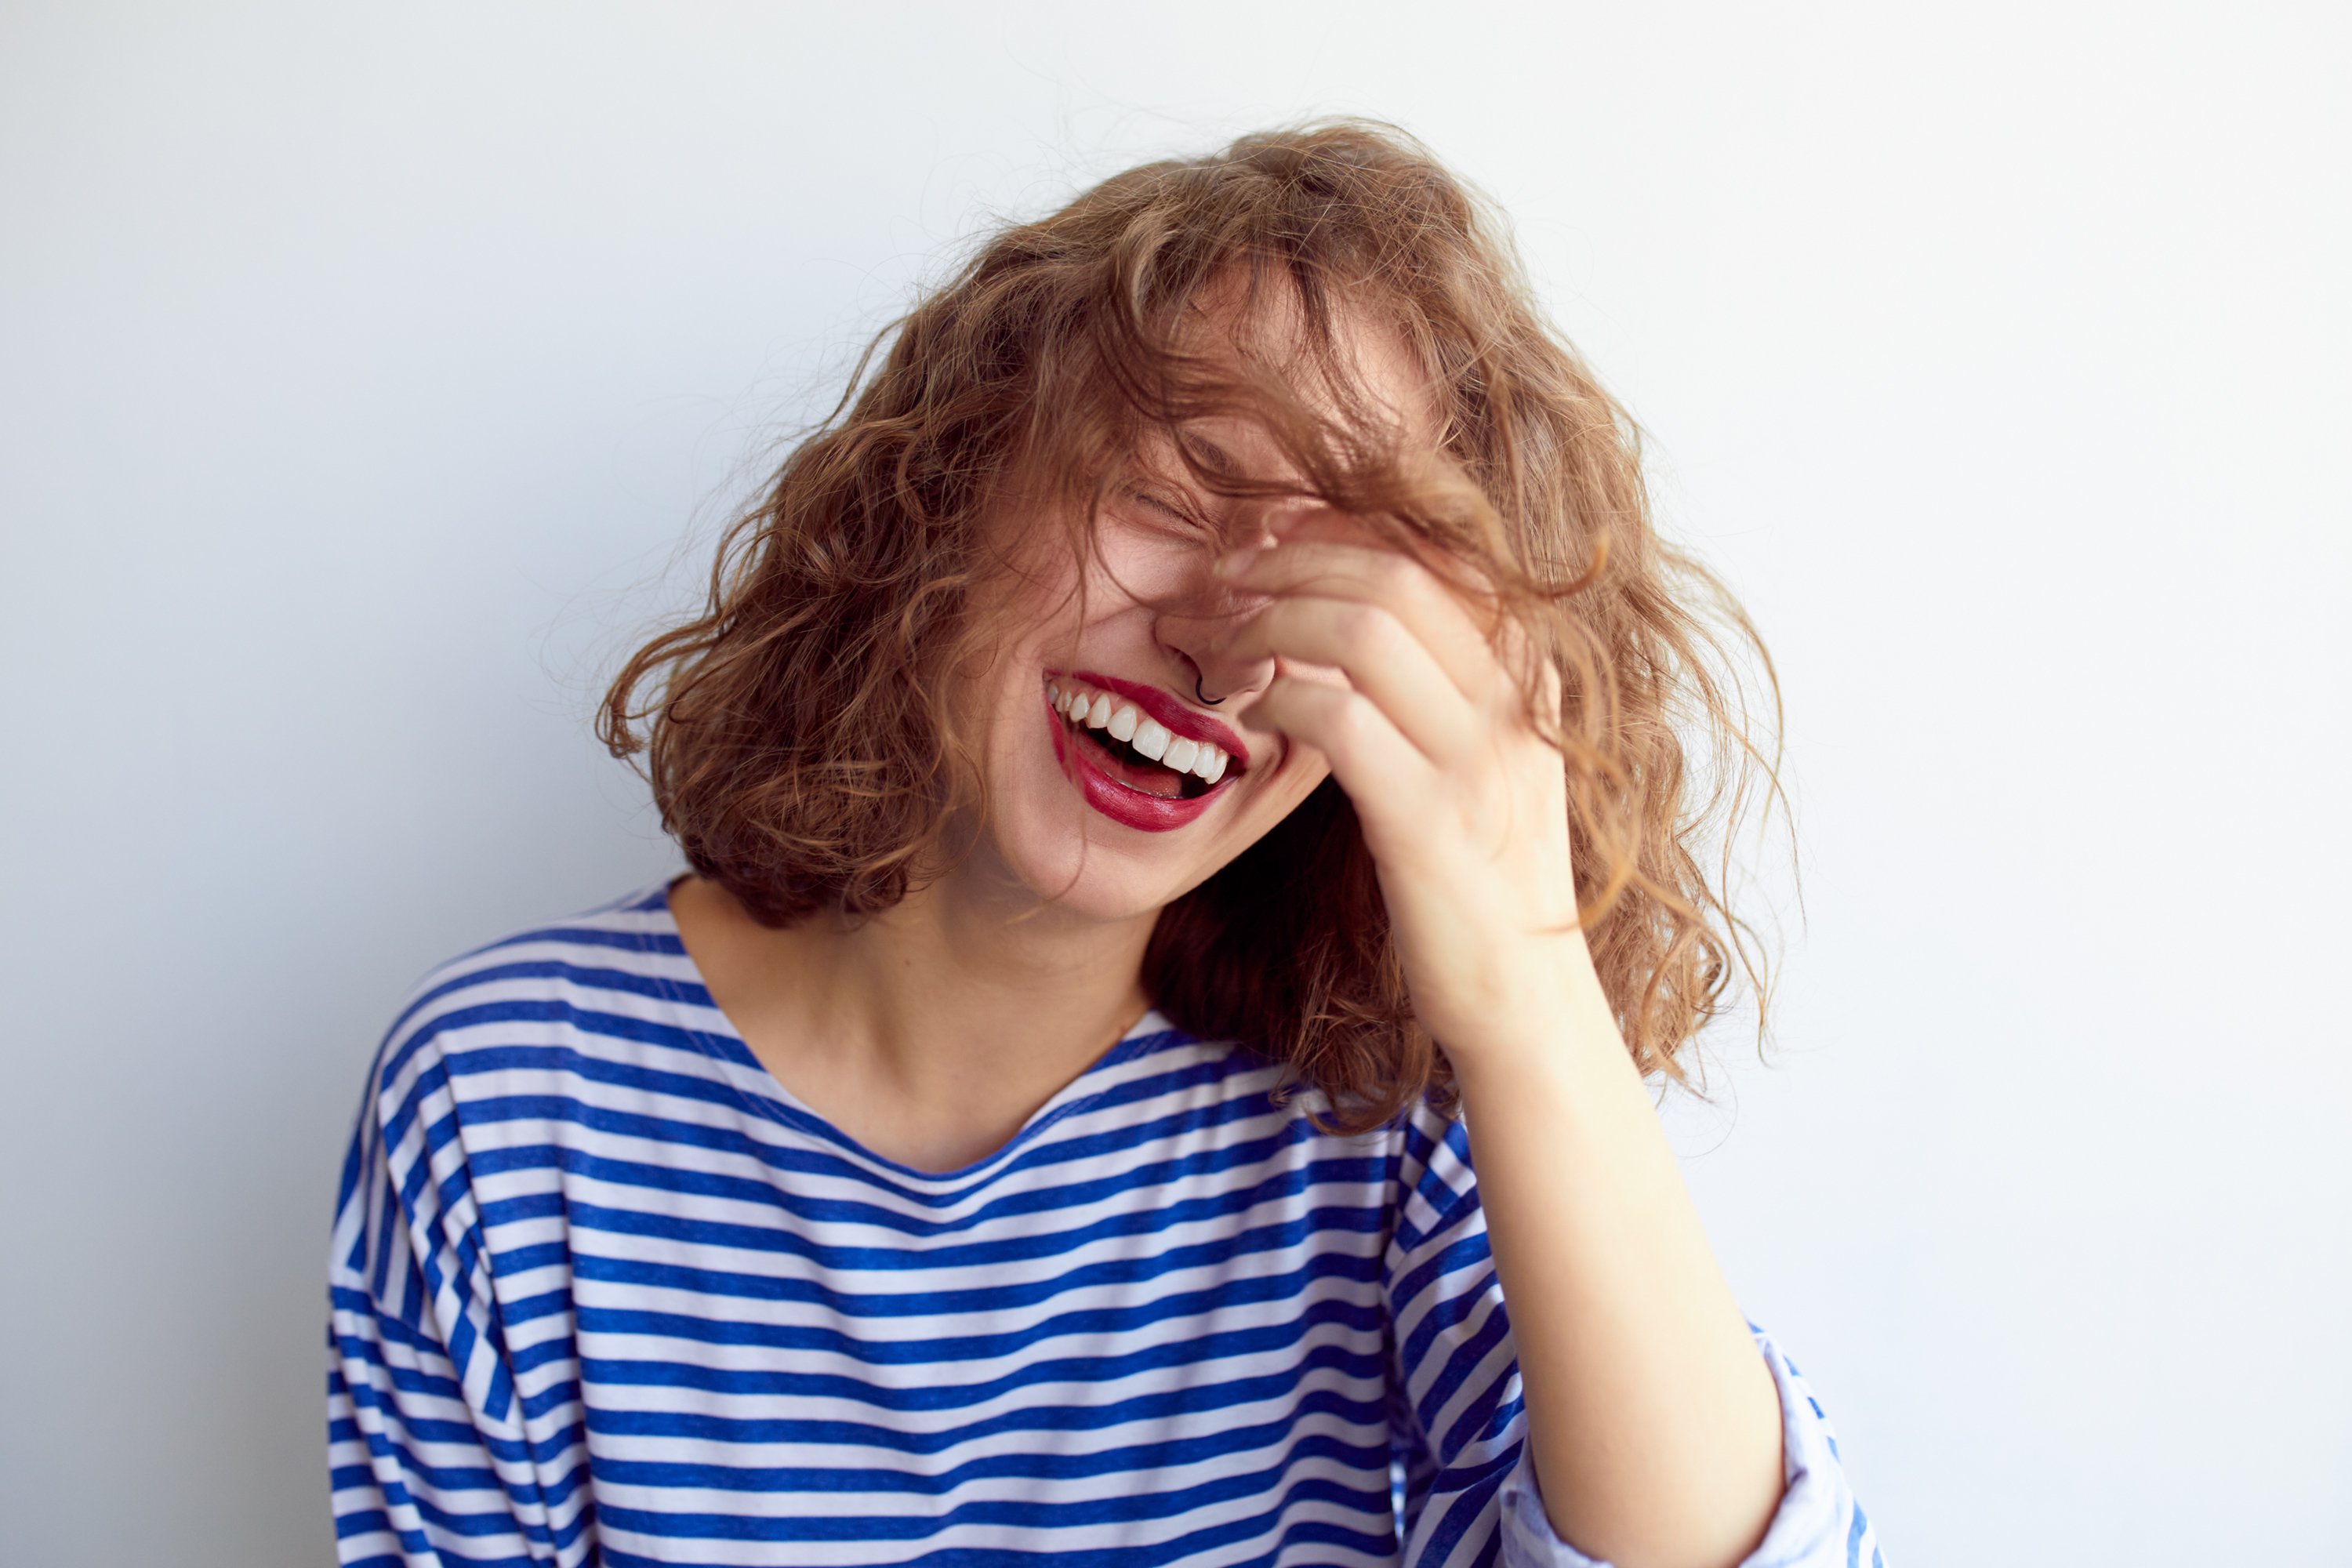 A woman has her hand to her face while laughing. | Photo: Shutterstock